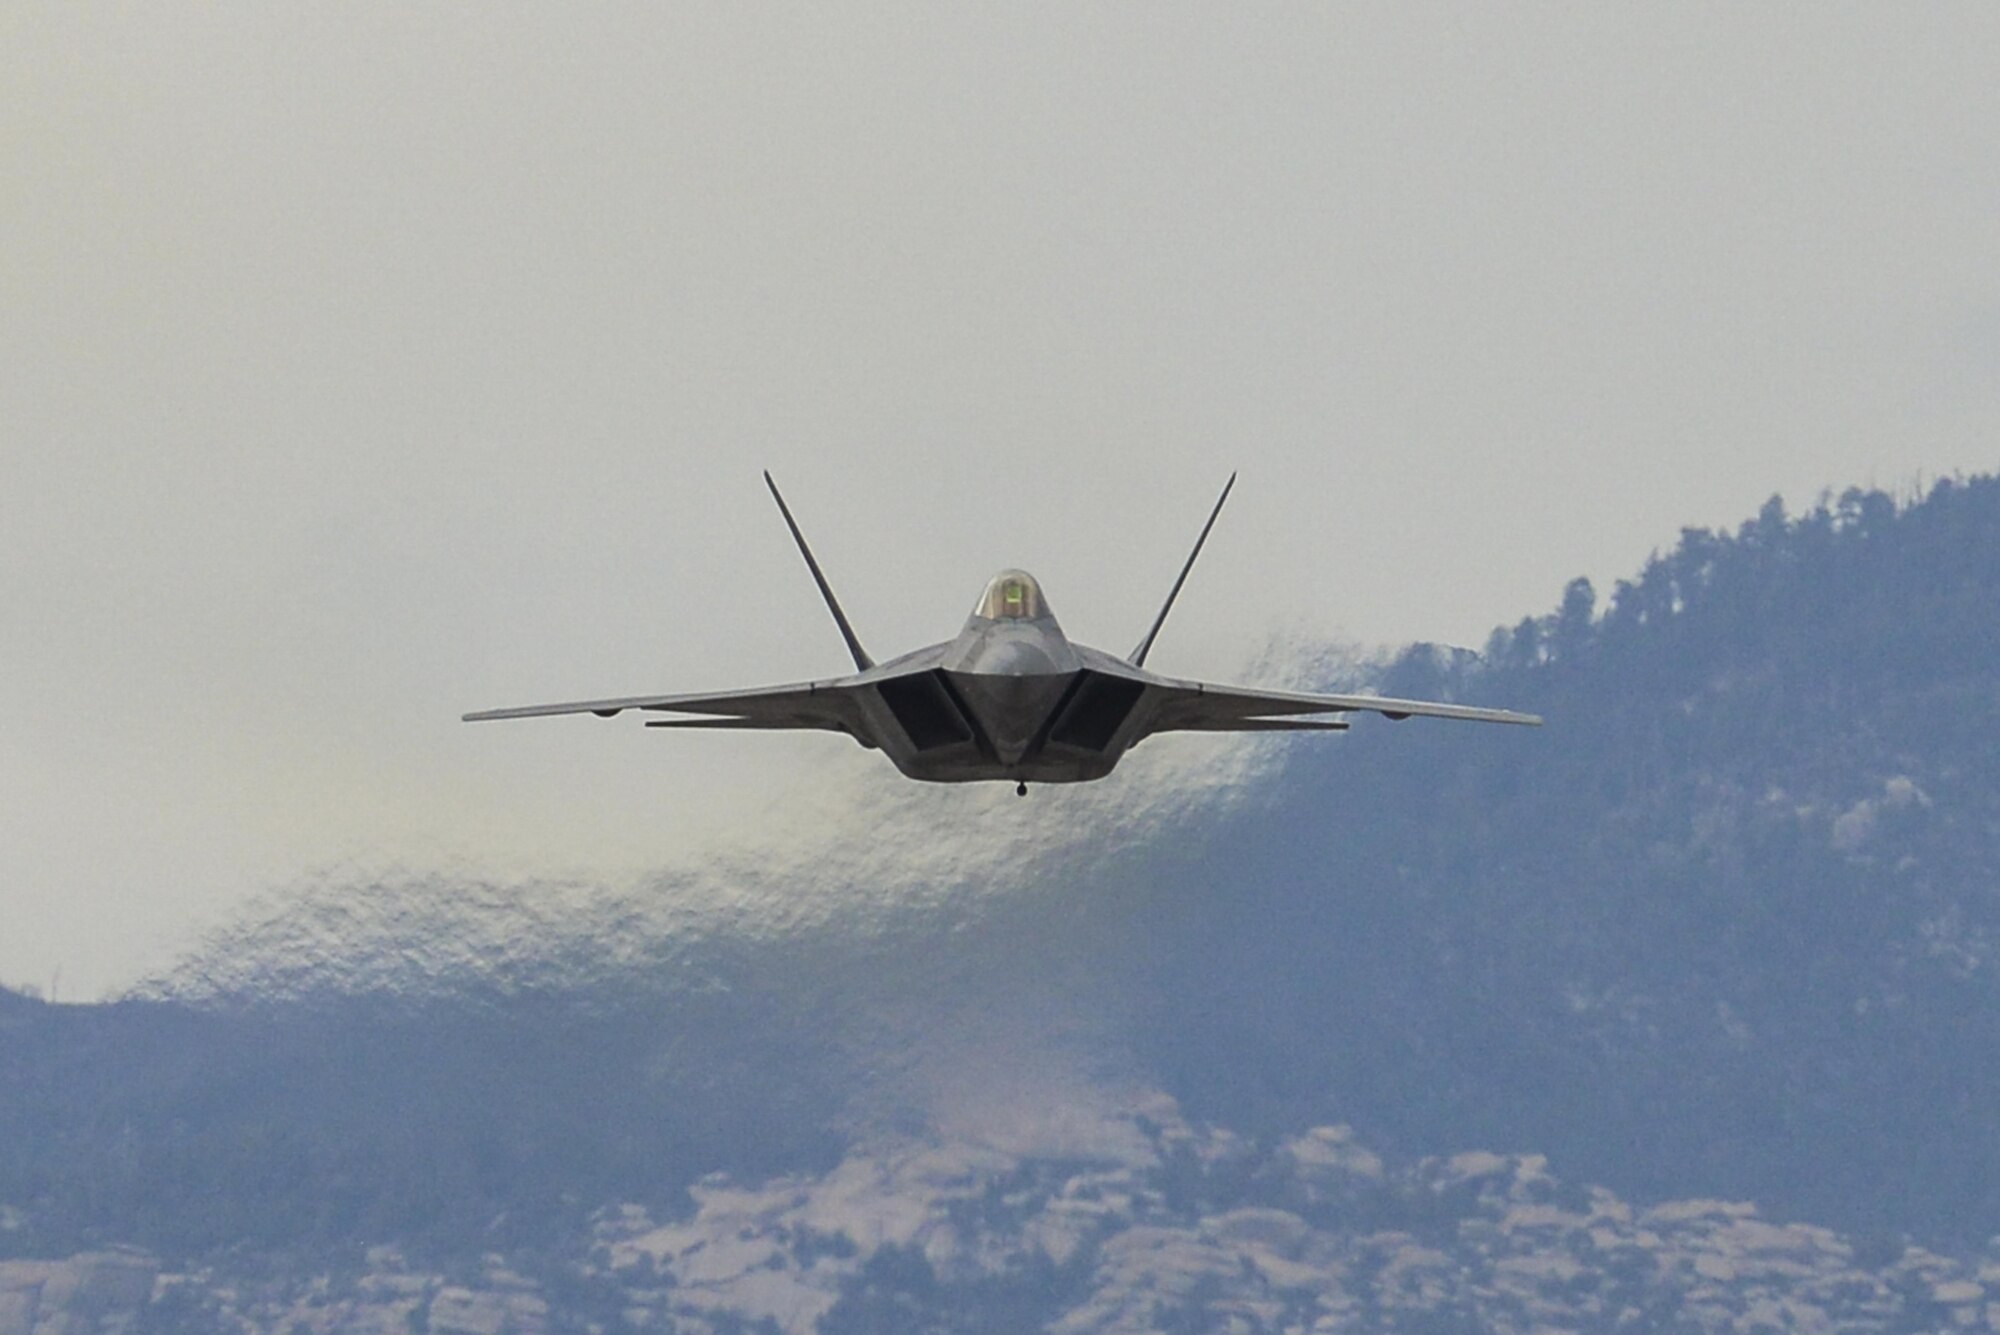 A U.S. Air Force F-22 Raptor performs an aerial maneuver during the 2016 Heritage Flight Training and Certification Course at Davis-Mothan Air Force Base, Ariz., March 5, 2016.  The annual aerial demonstration training event has been held at D-M since 2001, and the course features aerial demonstrations from historical and modern fighter aircraft. (U.S. Air Force photo by Senior Airman Chris Massey/Released)